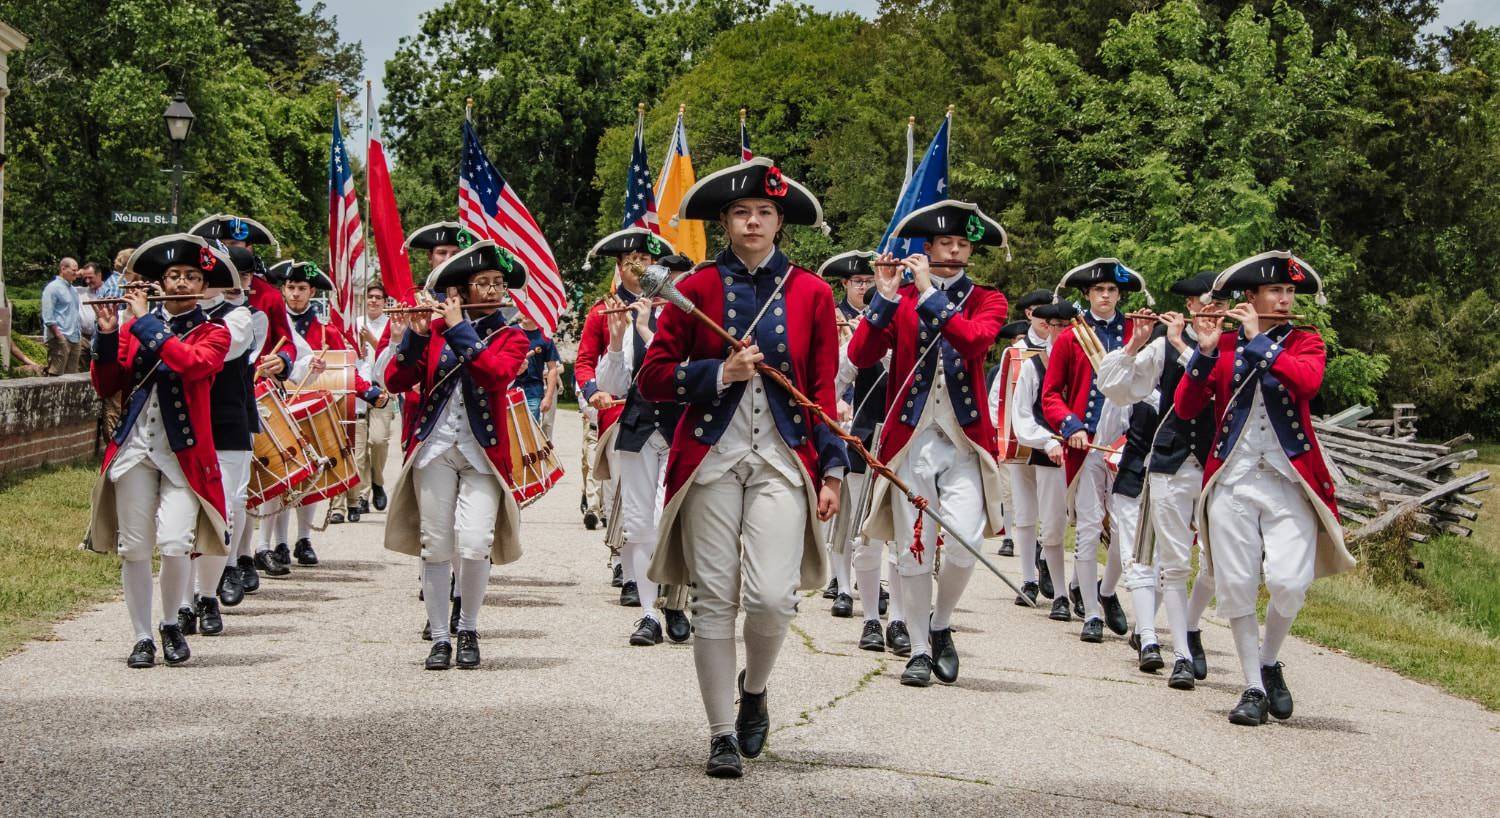 Marching band dressed in American Colonial uniforms performing for people